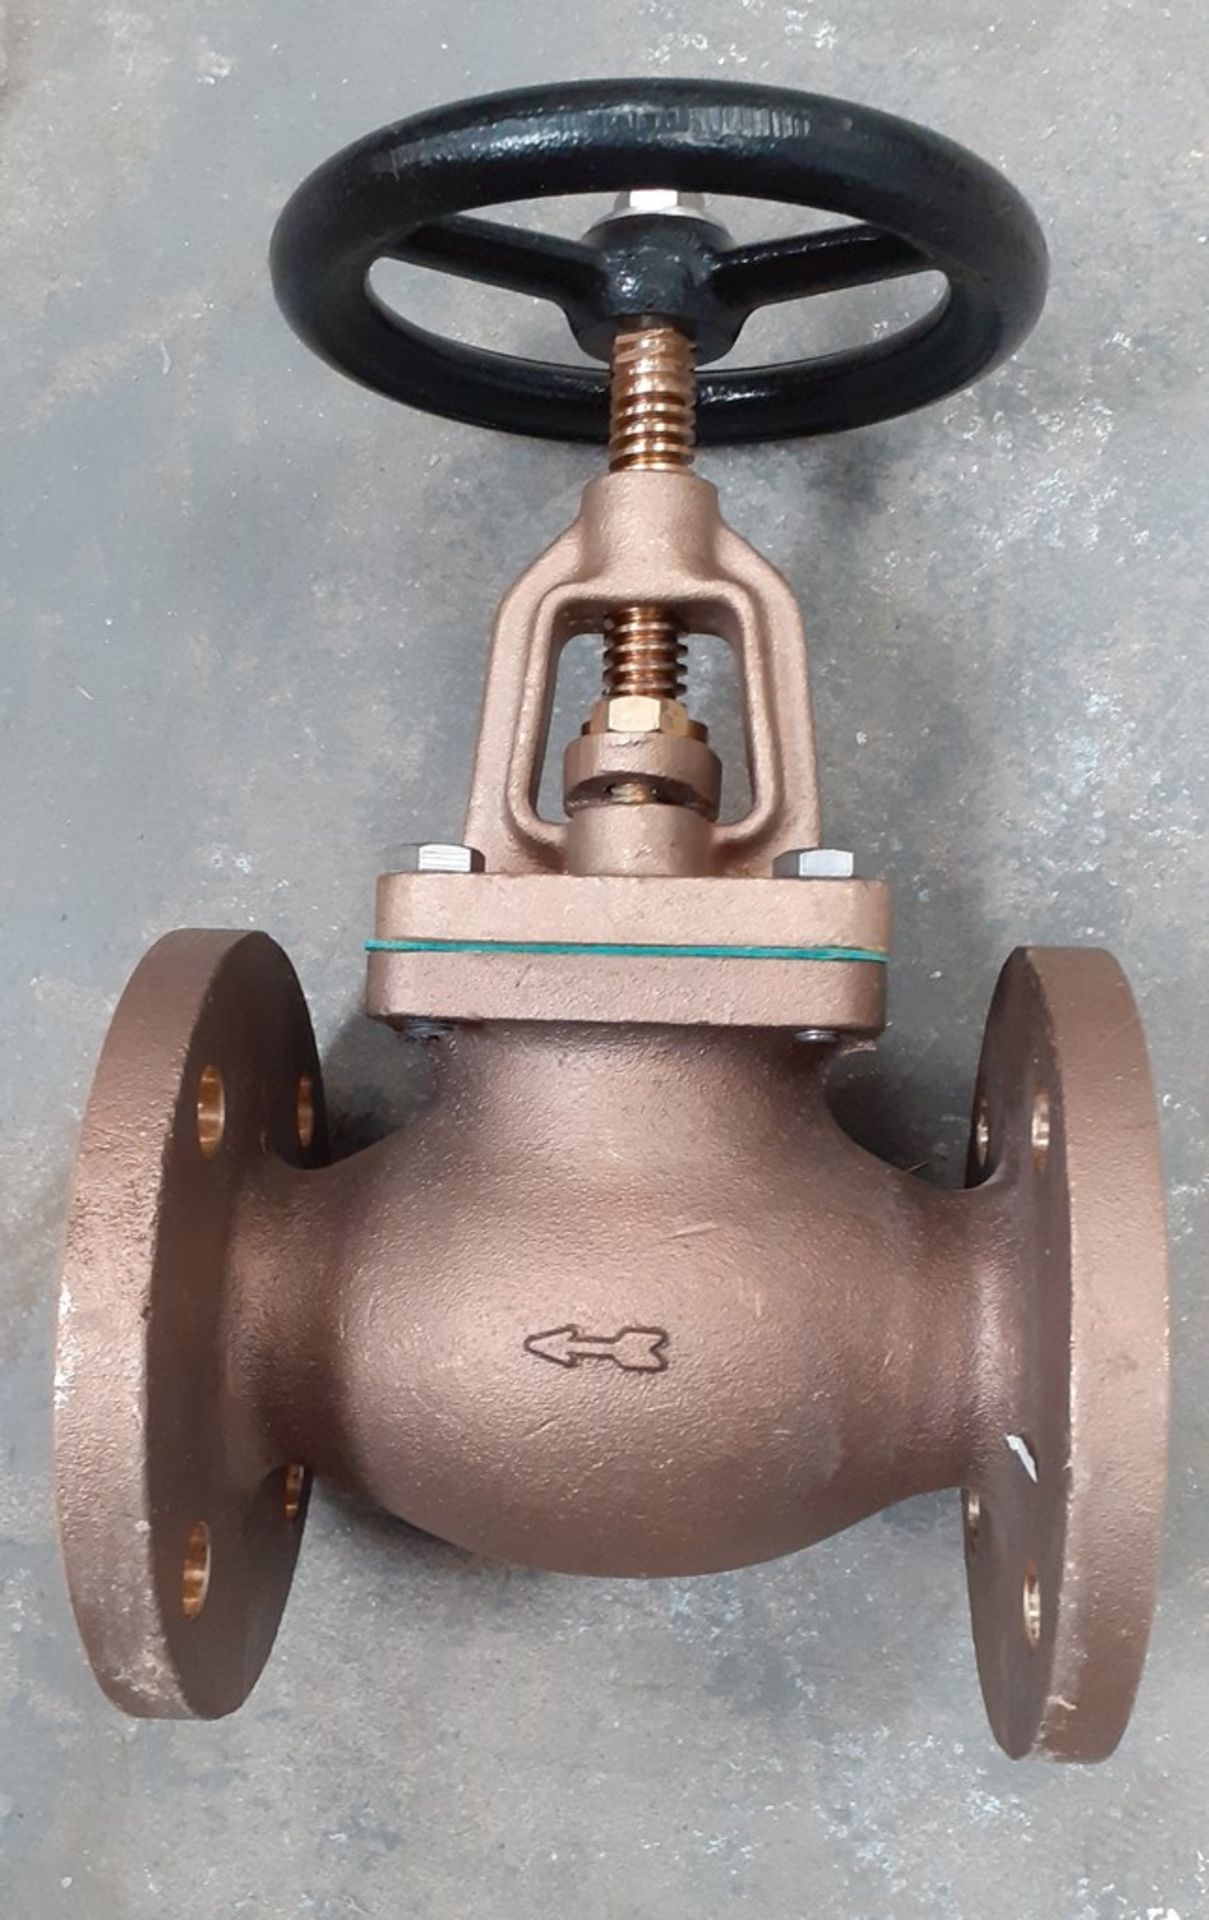 VALVE GLOBE 2" FIG22 (133) BOLTED PN 25 RATED MAR - JOHNSON VALVES (Qnty: 1) - Image 2 of 2